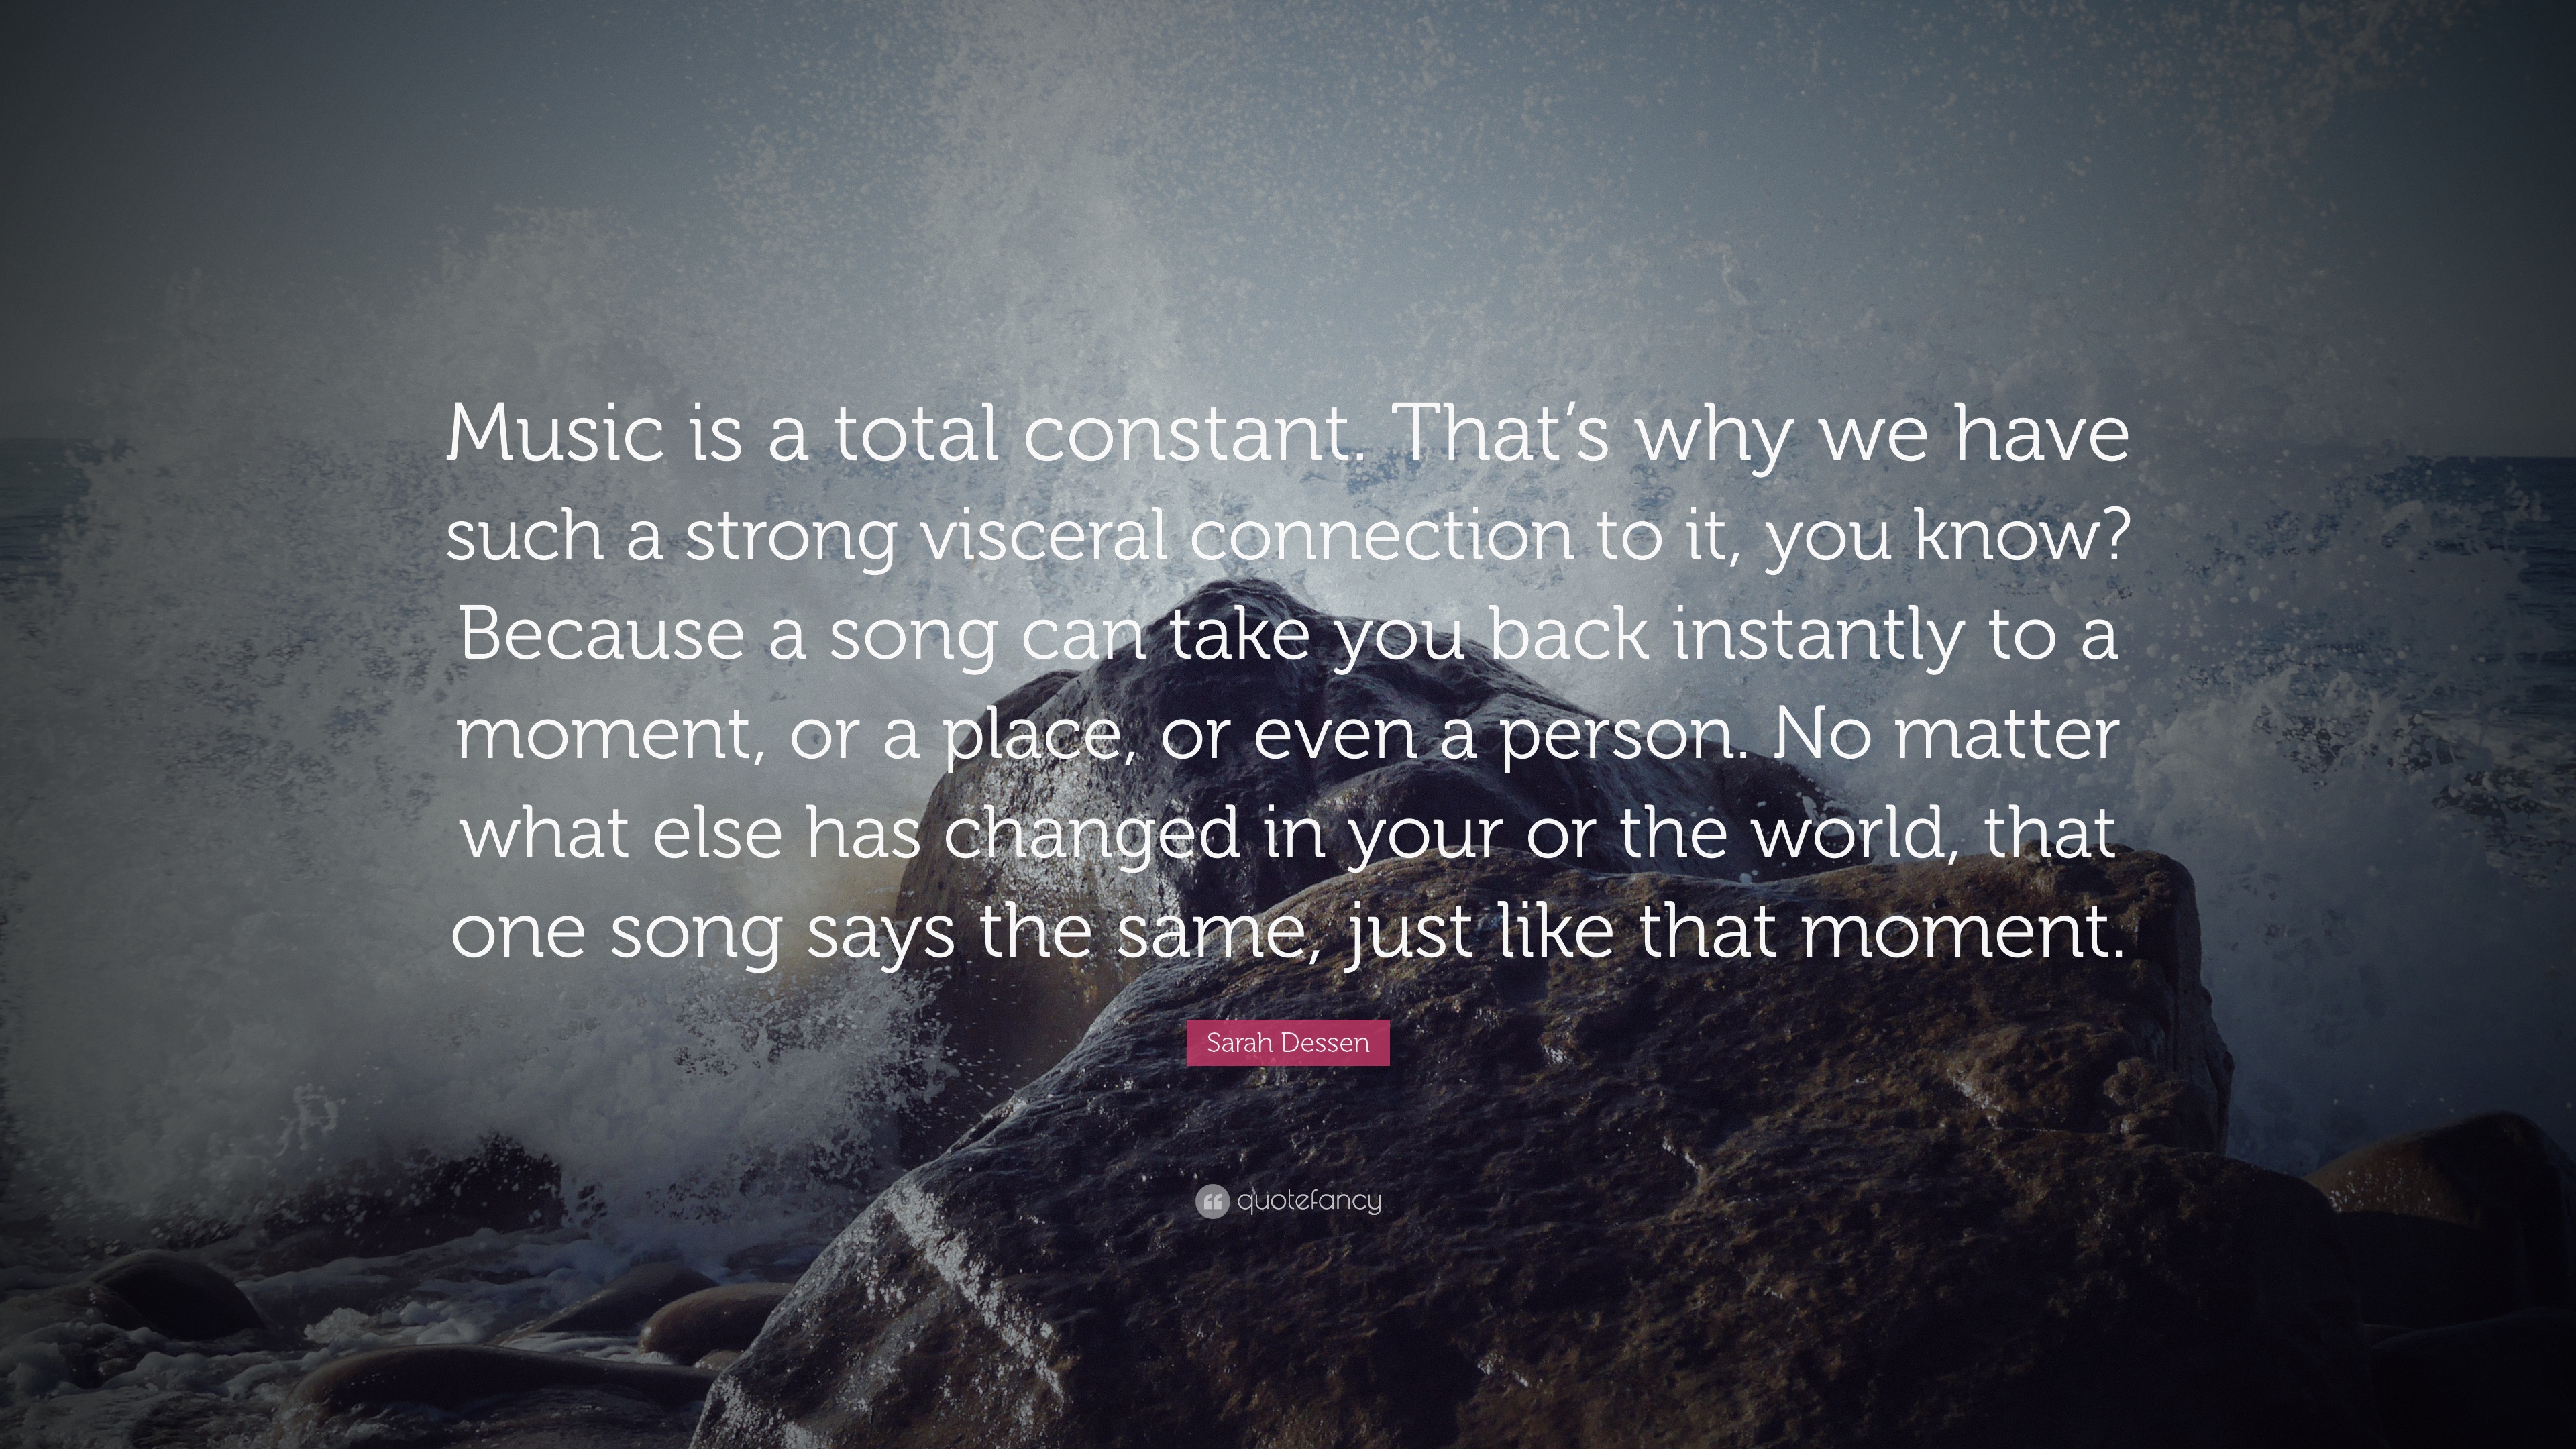 Music is a total constant. That’s why we have such a strong visceral connection to it, you know Because a song can take you back instantly to a moment,... Sarrah Dessen